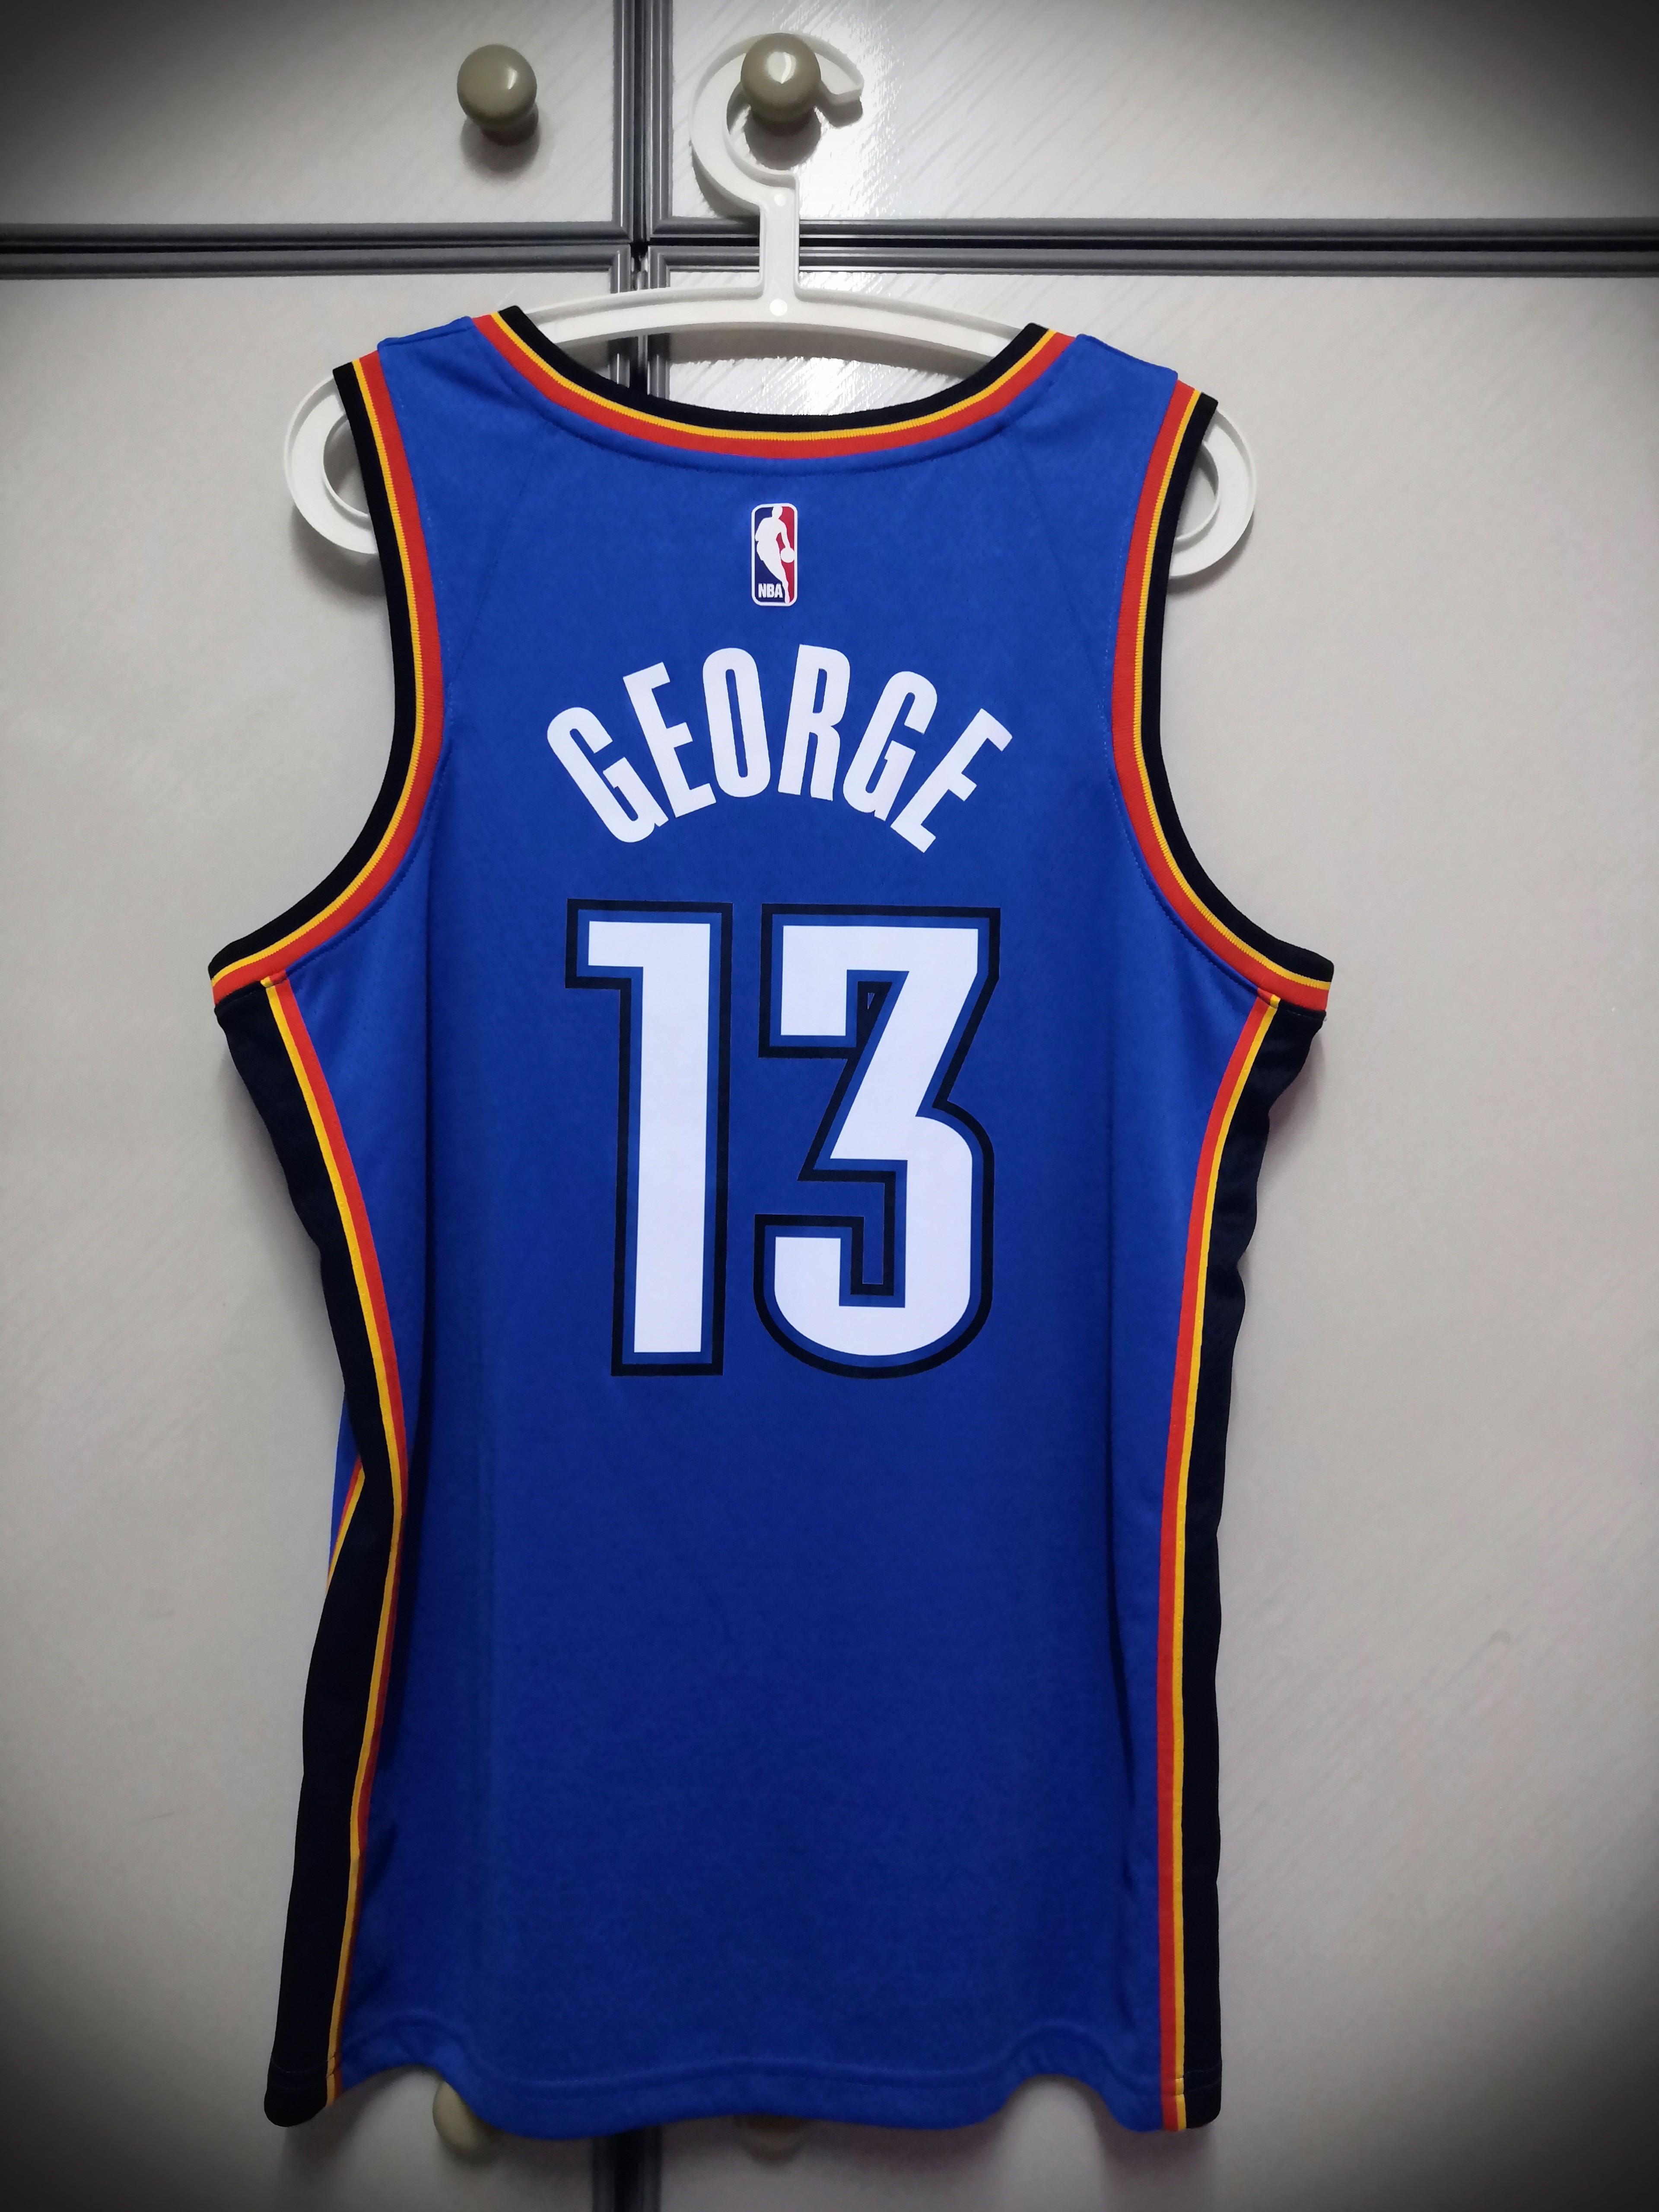 Nike NBA SW Fan Edition Los Angeles Clippers Paul George No. 13